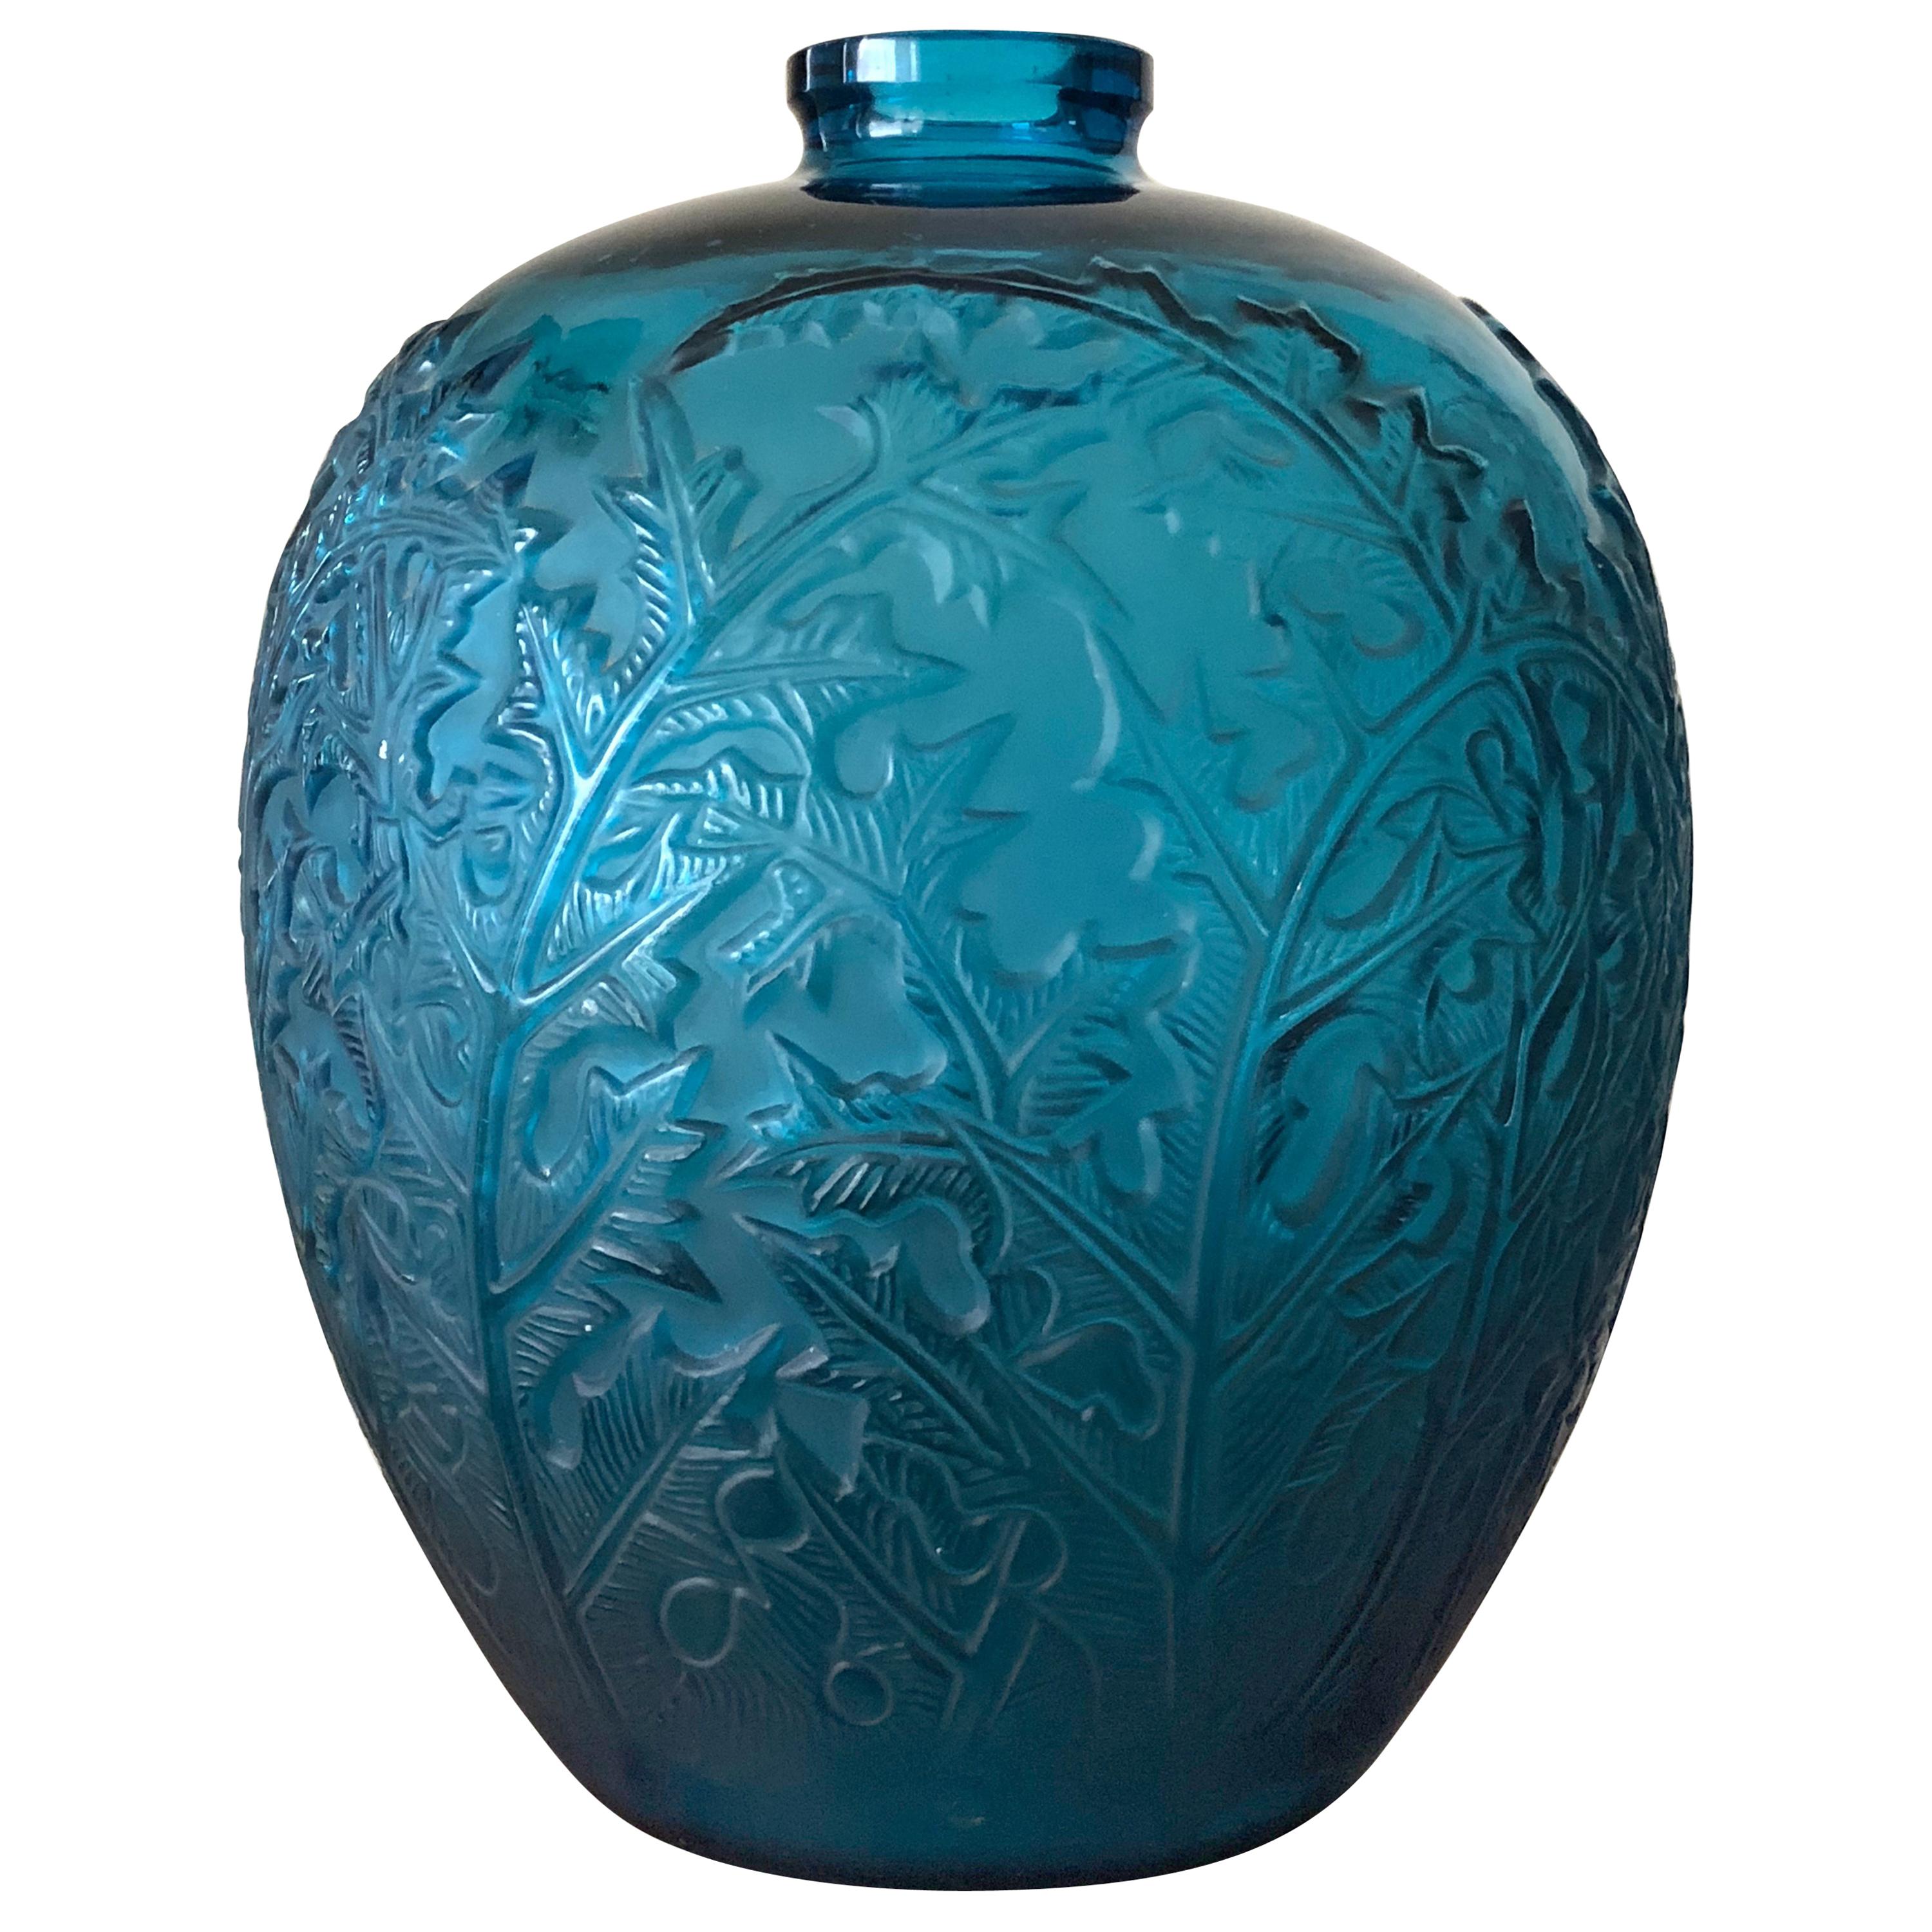 1921 Rene Lalique Acanthes Vase in Electric Blue Glass